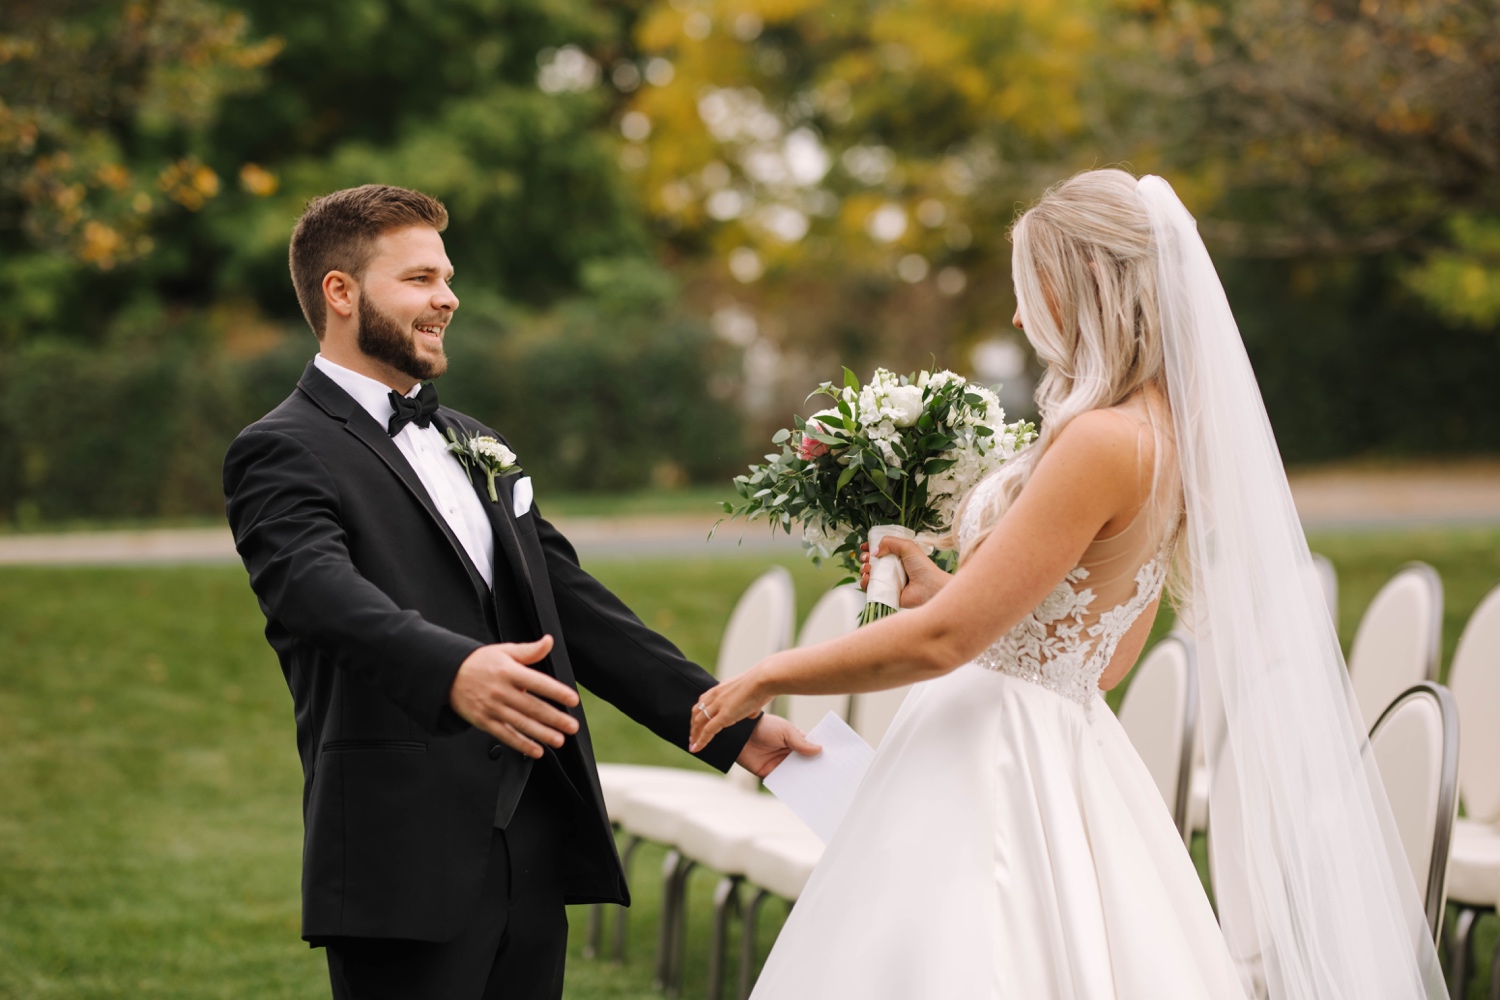 groom's first look at bride at outdoor fall wedding